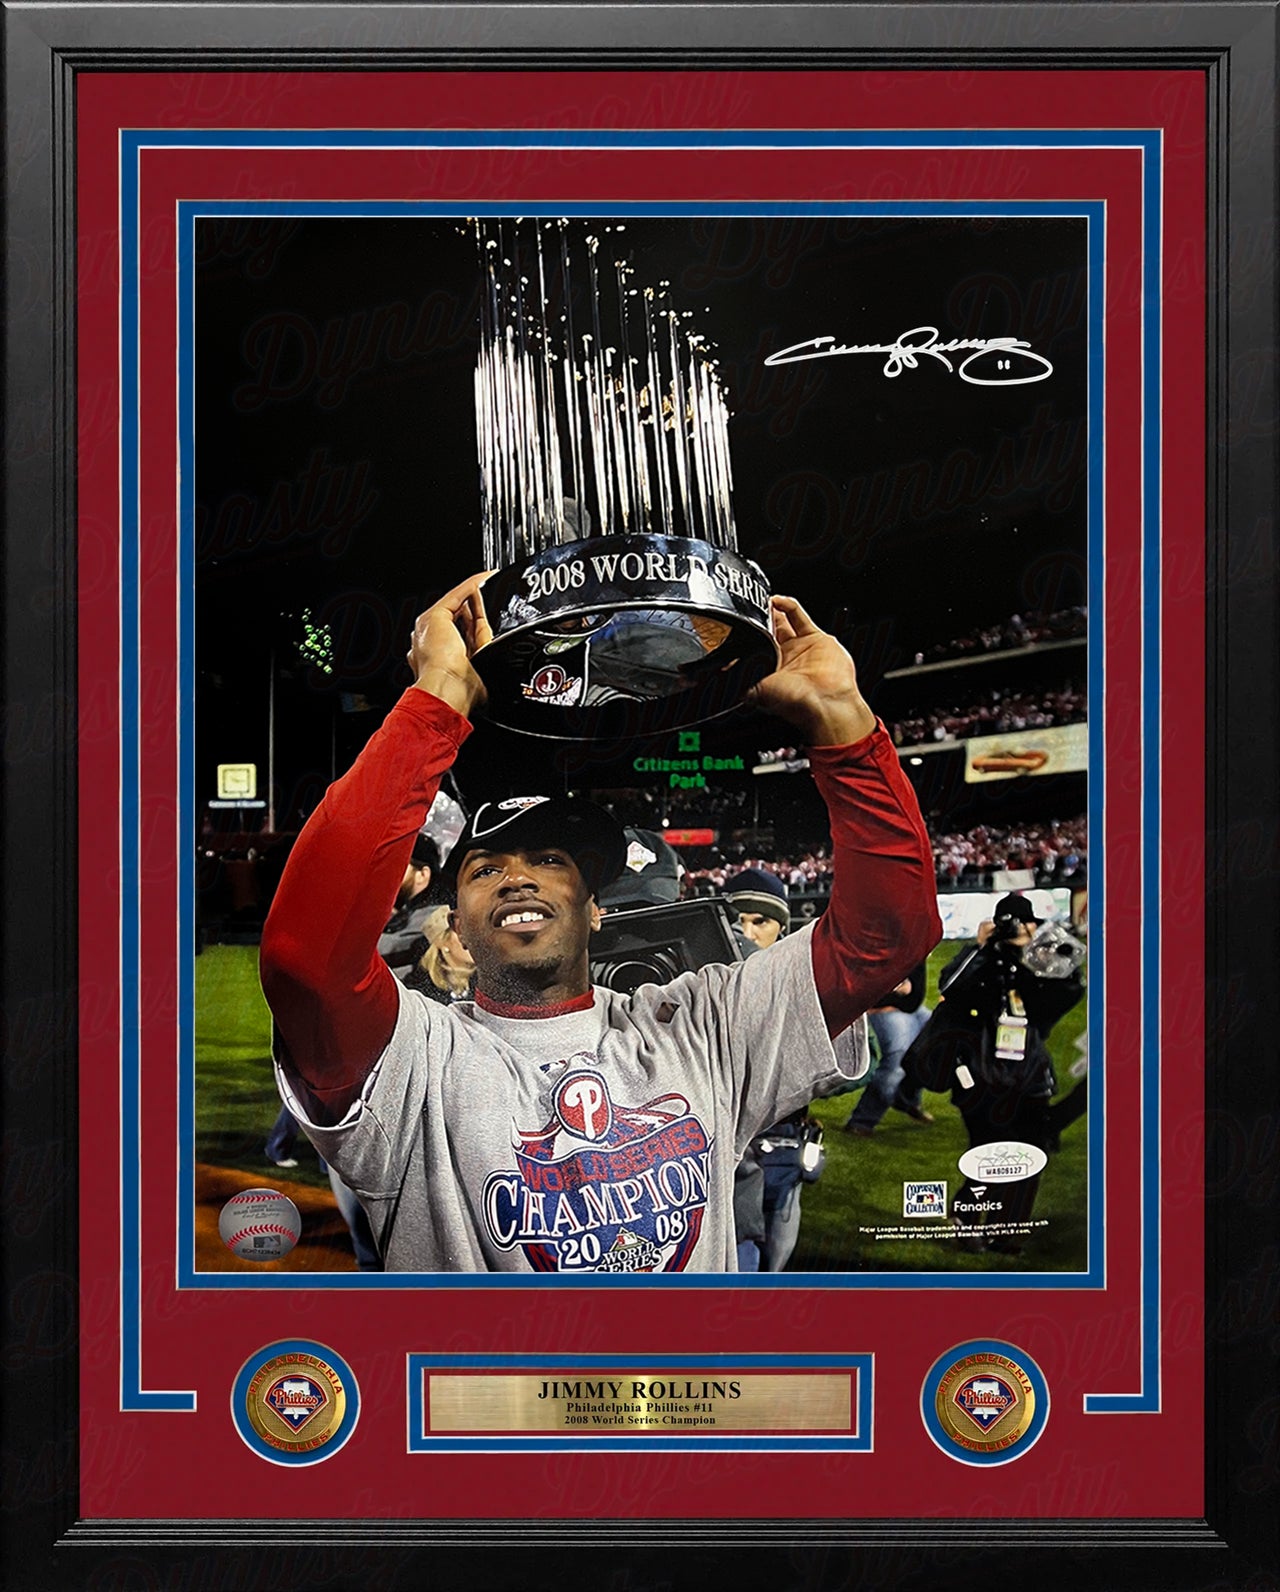 Jimmy Rollins 2008 World Series Trophy Autographed Philadelphia Phillies 16x20 Framed Photo - JSA Authenticated - Dynasty Sports & Framing 